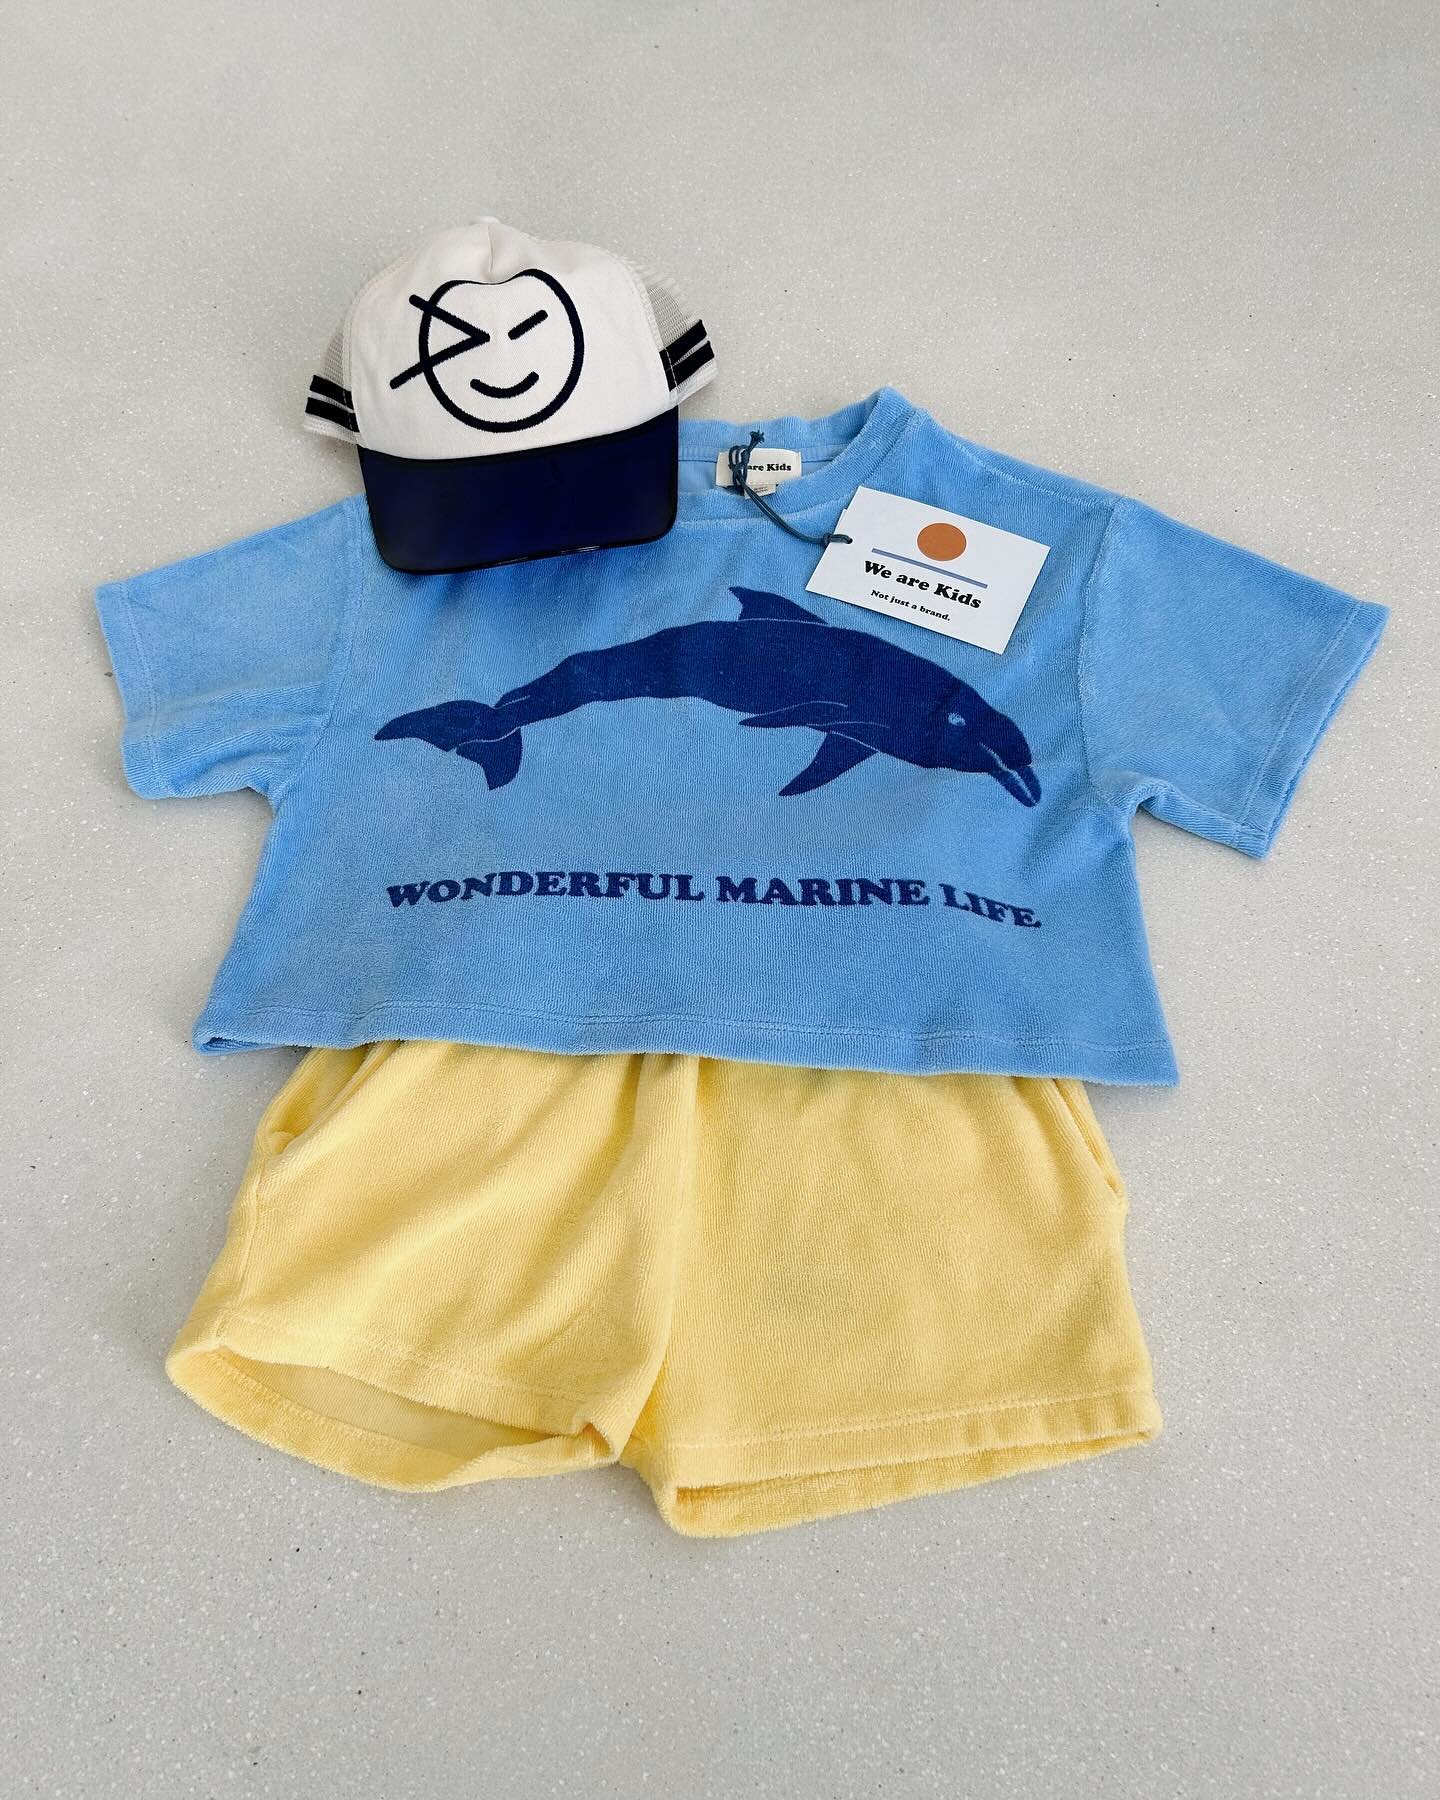 Definitely one of our favourite looks of this season 🐬💛 @wearekids_kids @wynkenkids 

Last sizes of this terry dolphin shirt &amp; yellow short so be quick if you like this look as much as we do 😎

#ottotiptotto #ottoilbassottostore #kidsfashion #